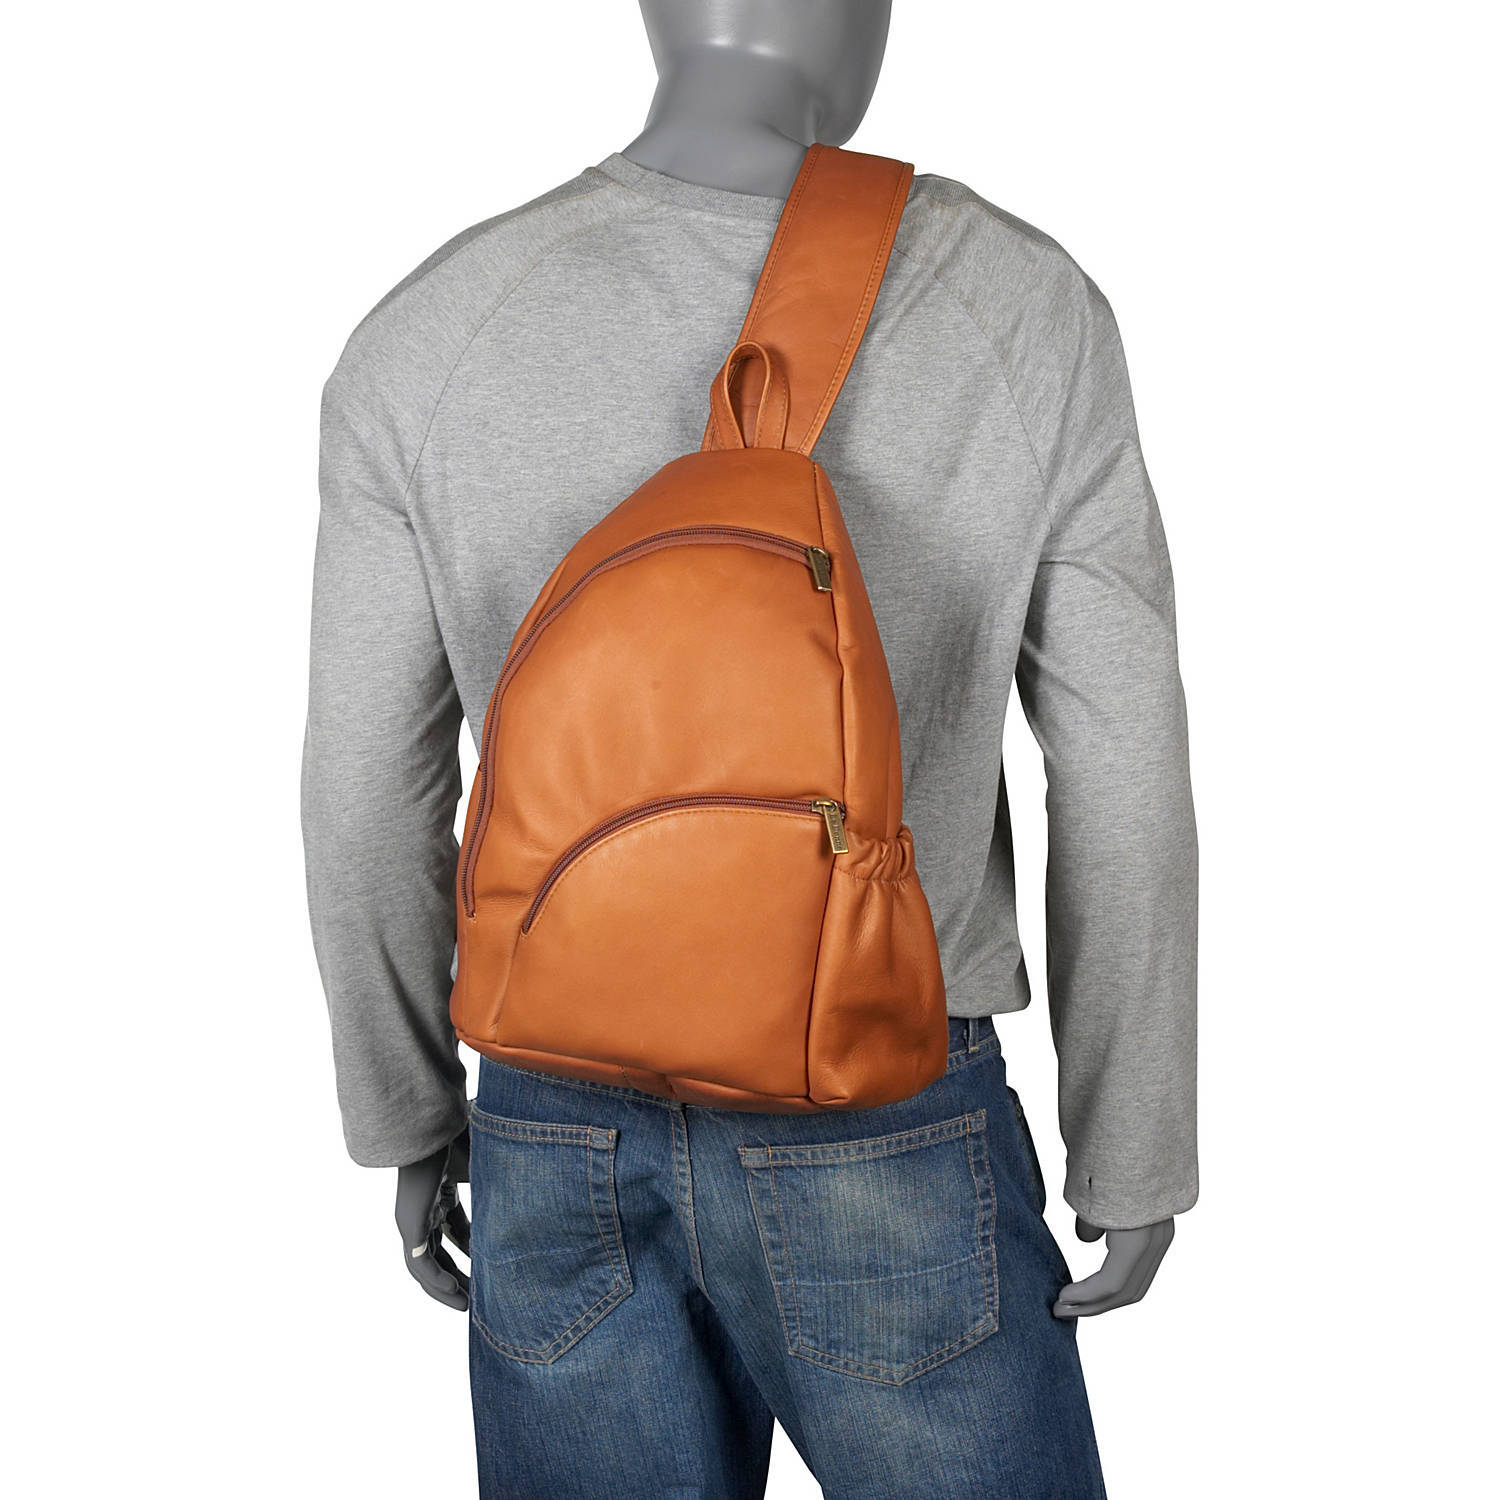 Le Donne Leather Two Zip Sling Pack LD-2012 - image 2 of 5